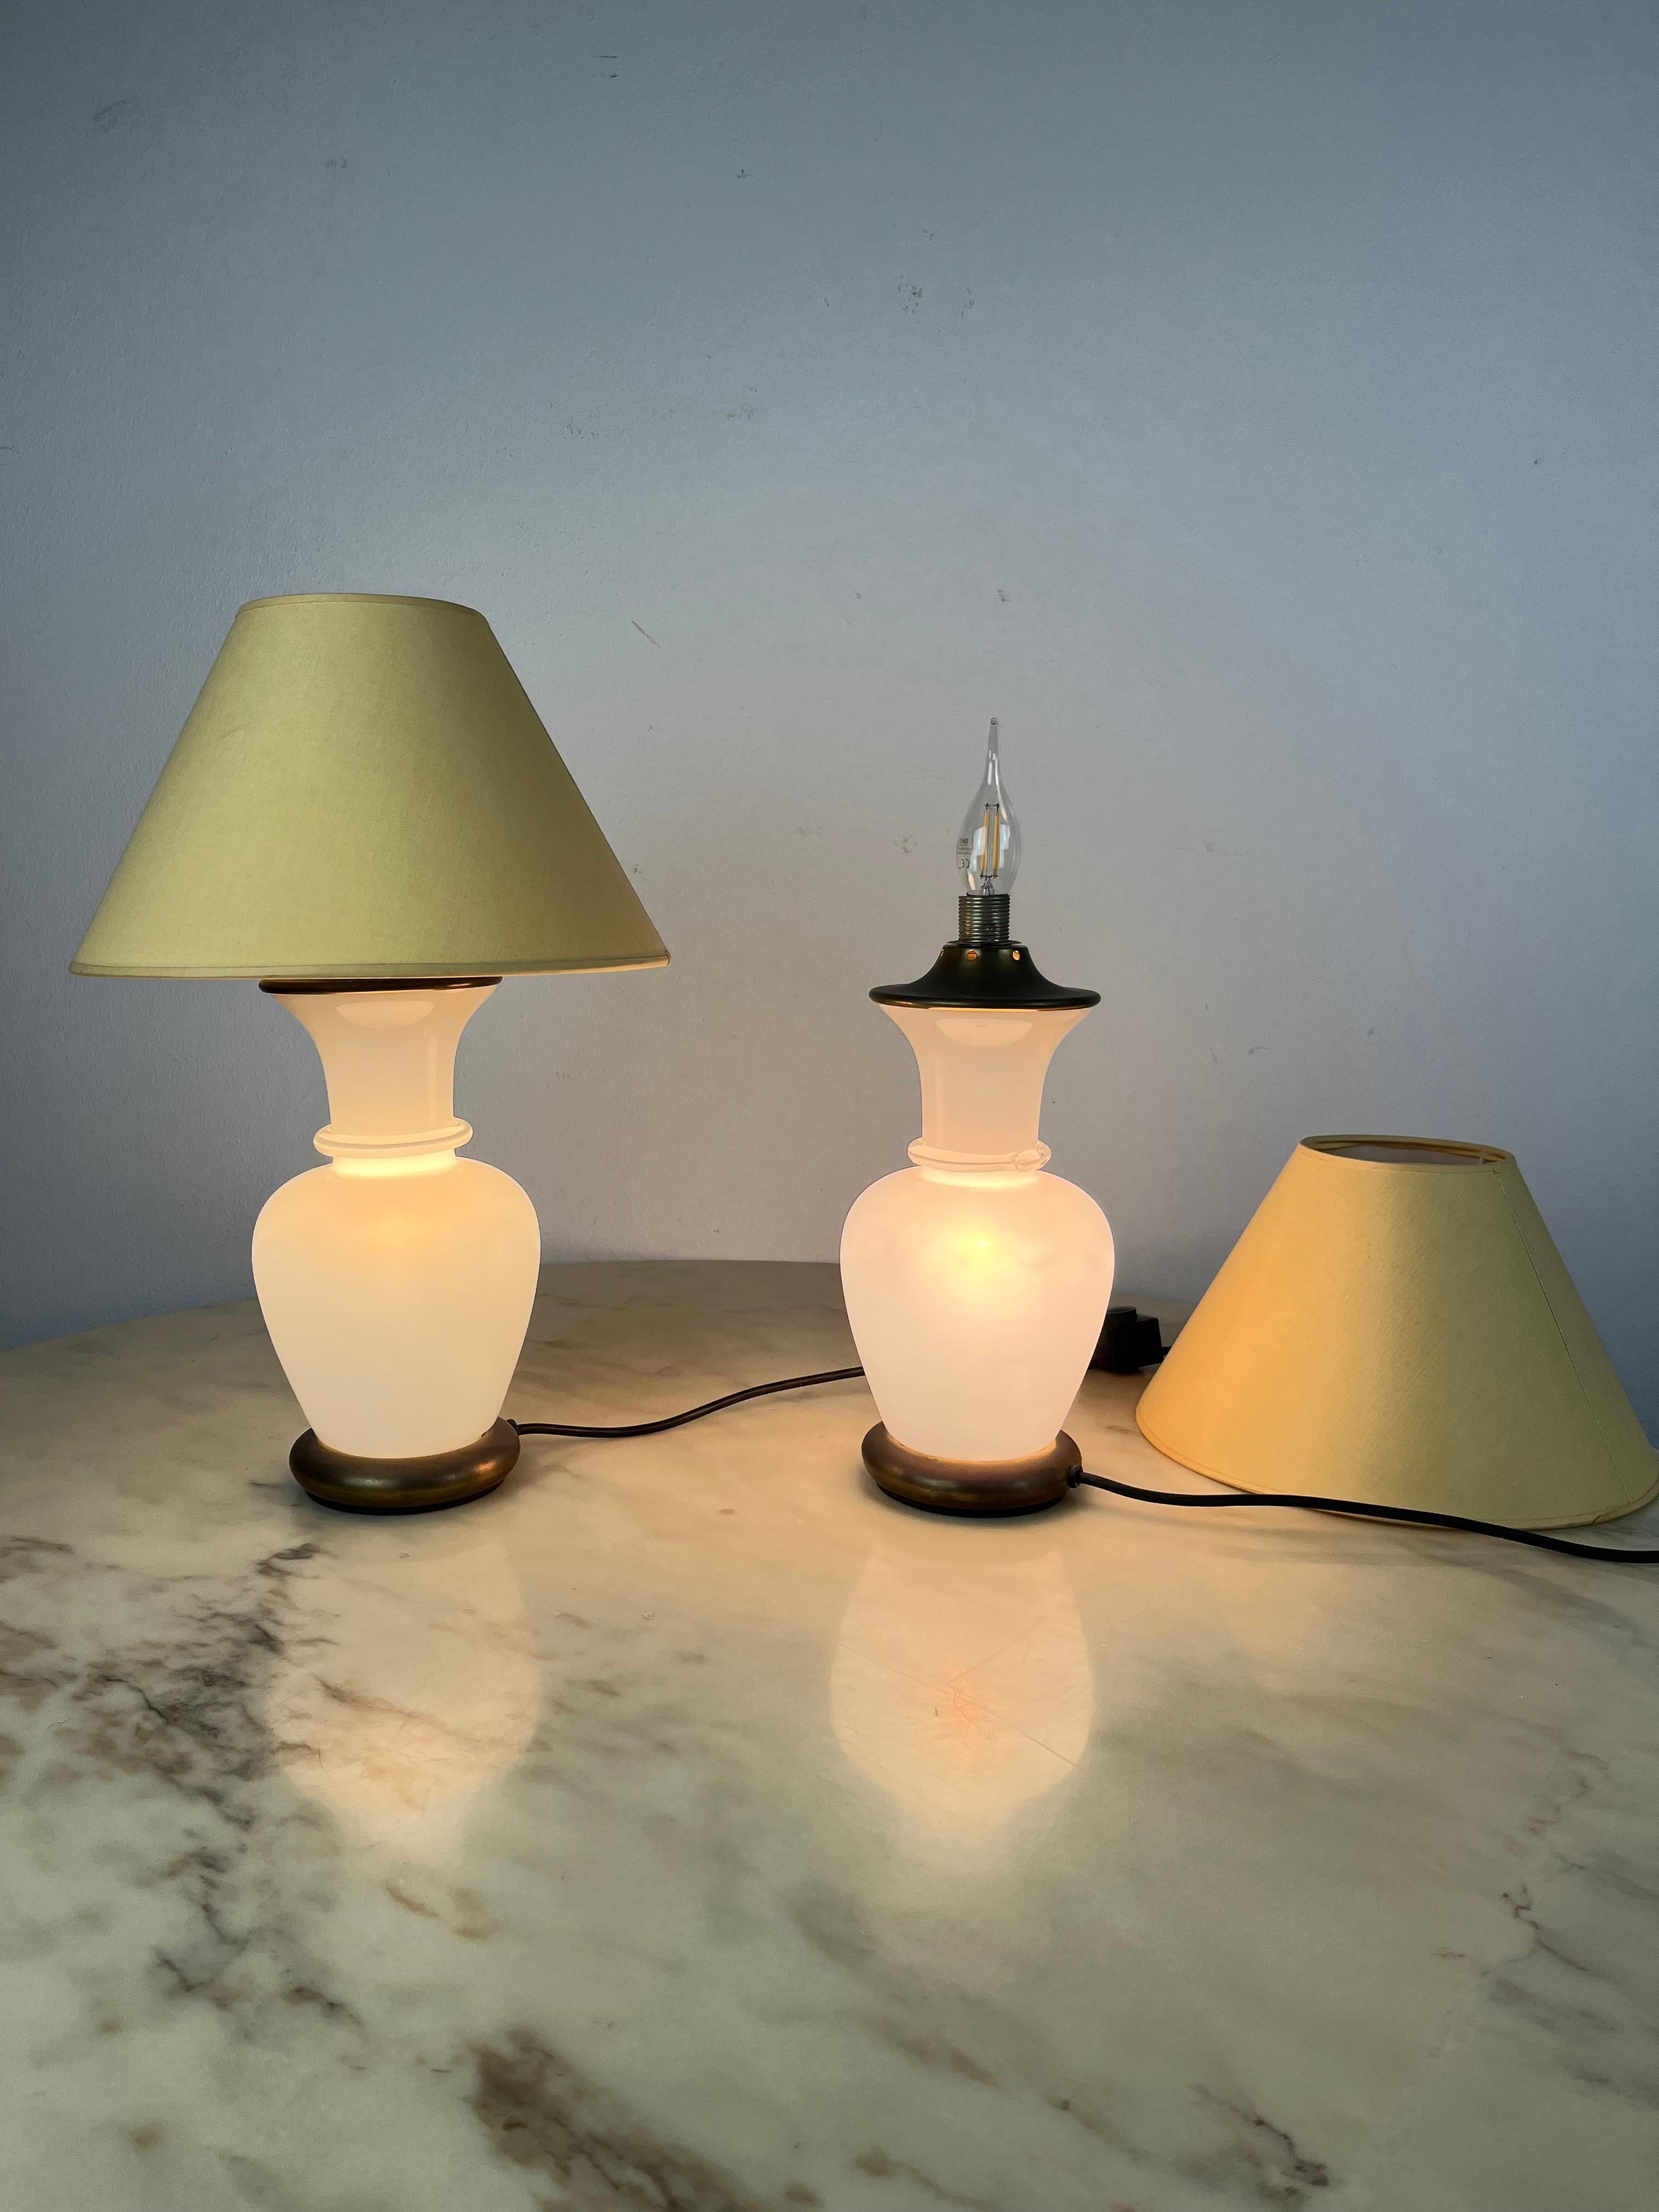 Set of 2 Murano Glass and Brass Table Lamps, F. Fabbian, Italy, 1970s For Sale 2